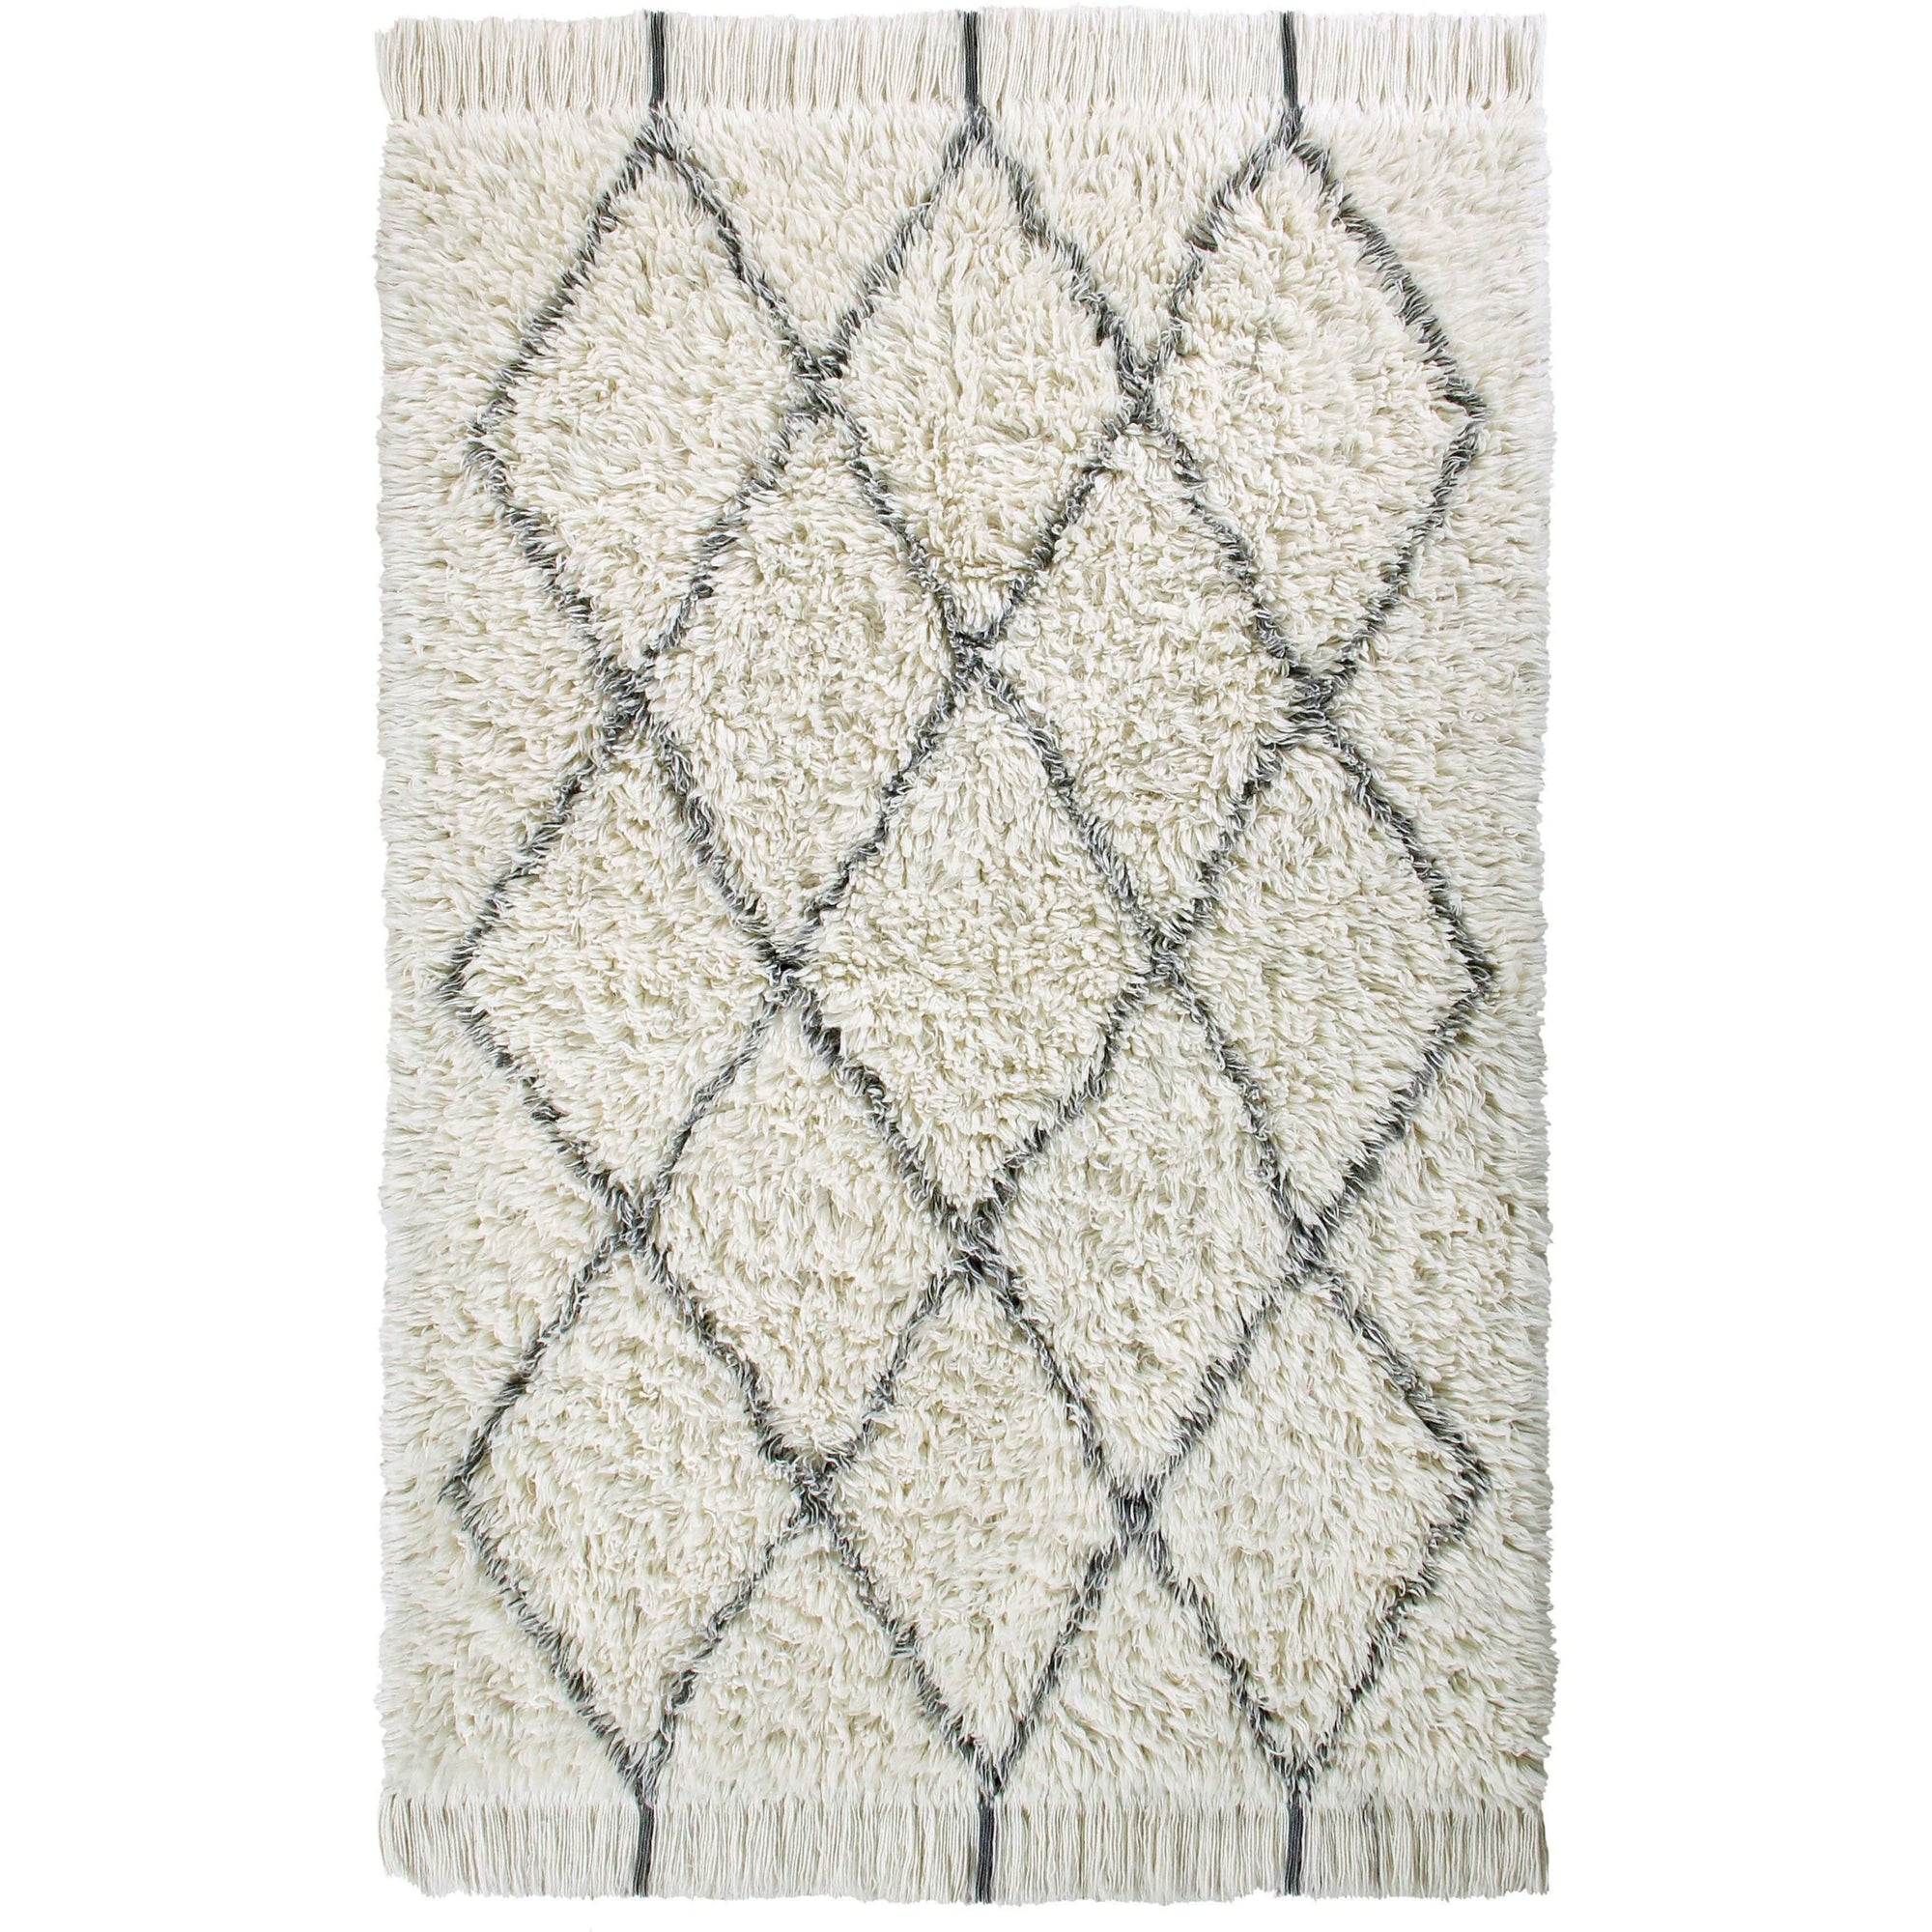 Lorena Canals Berber Soul Wool Washable Area Rug